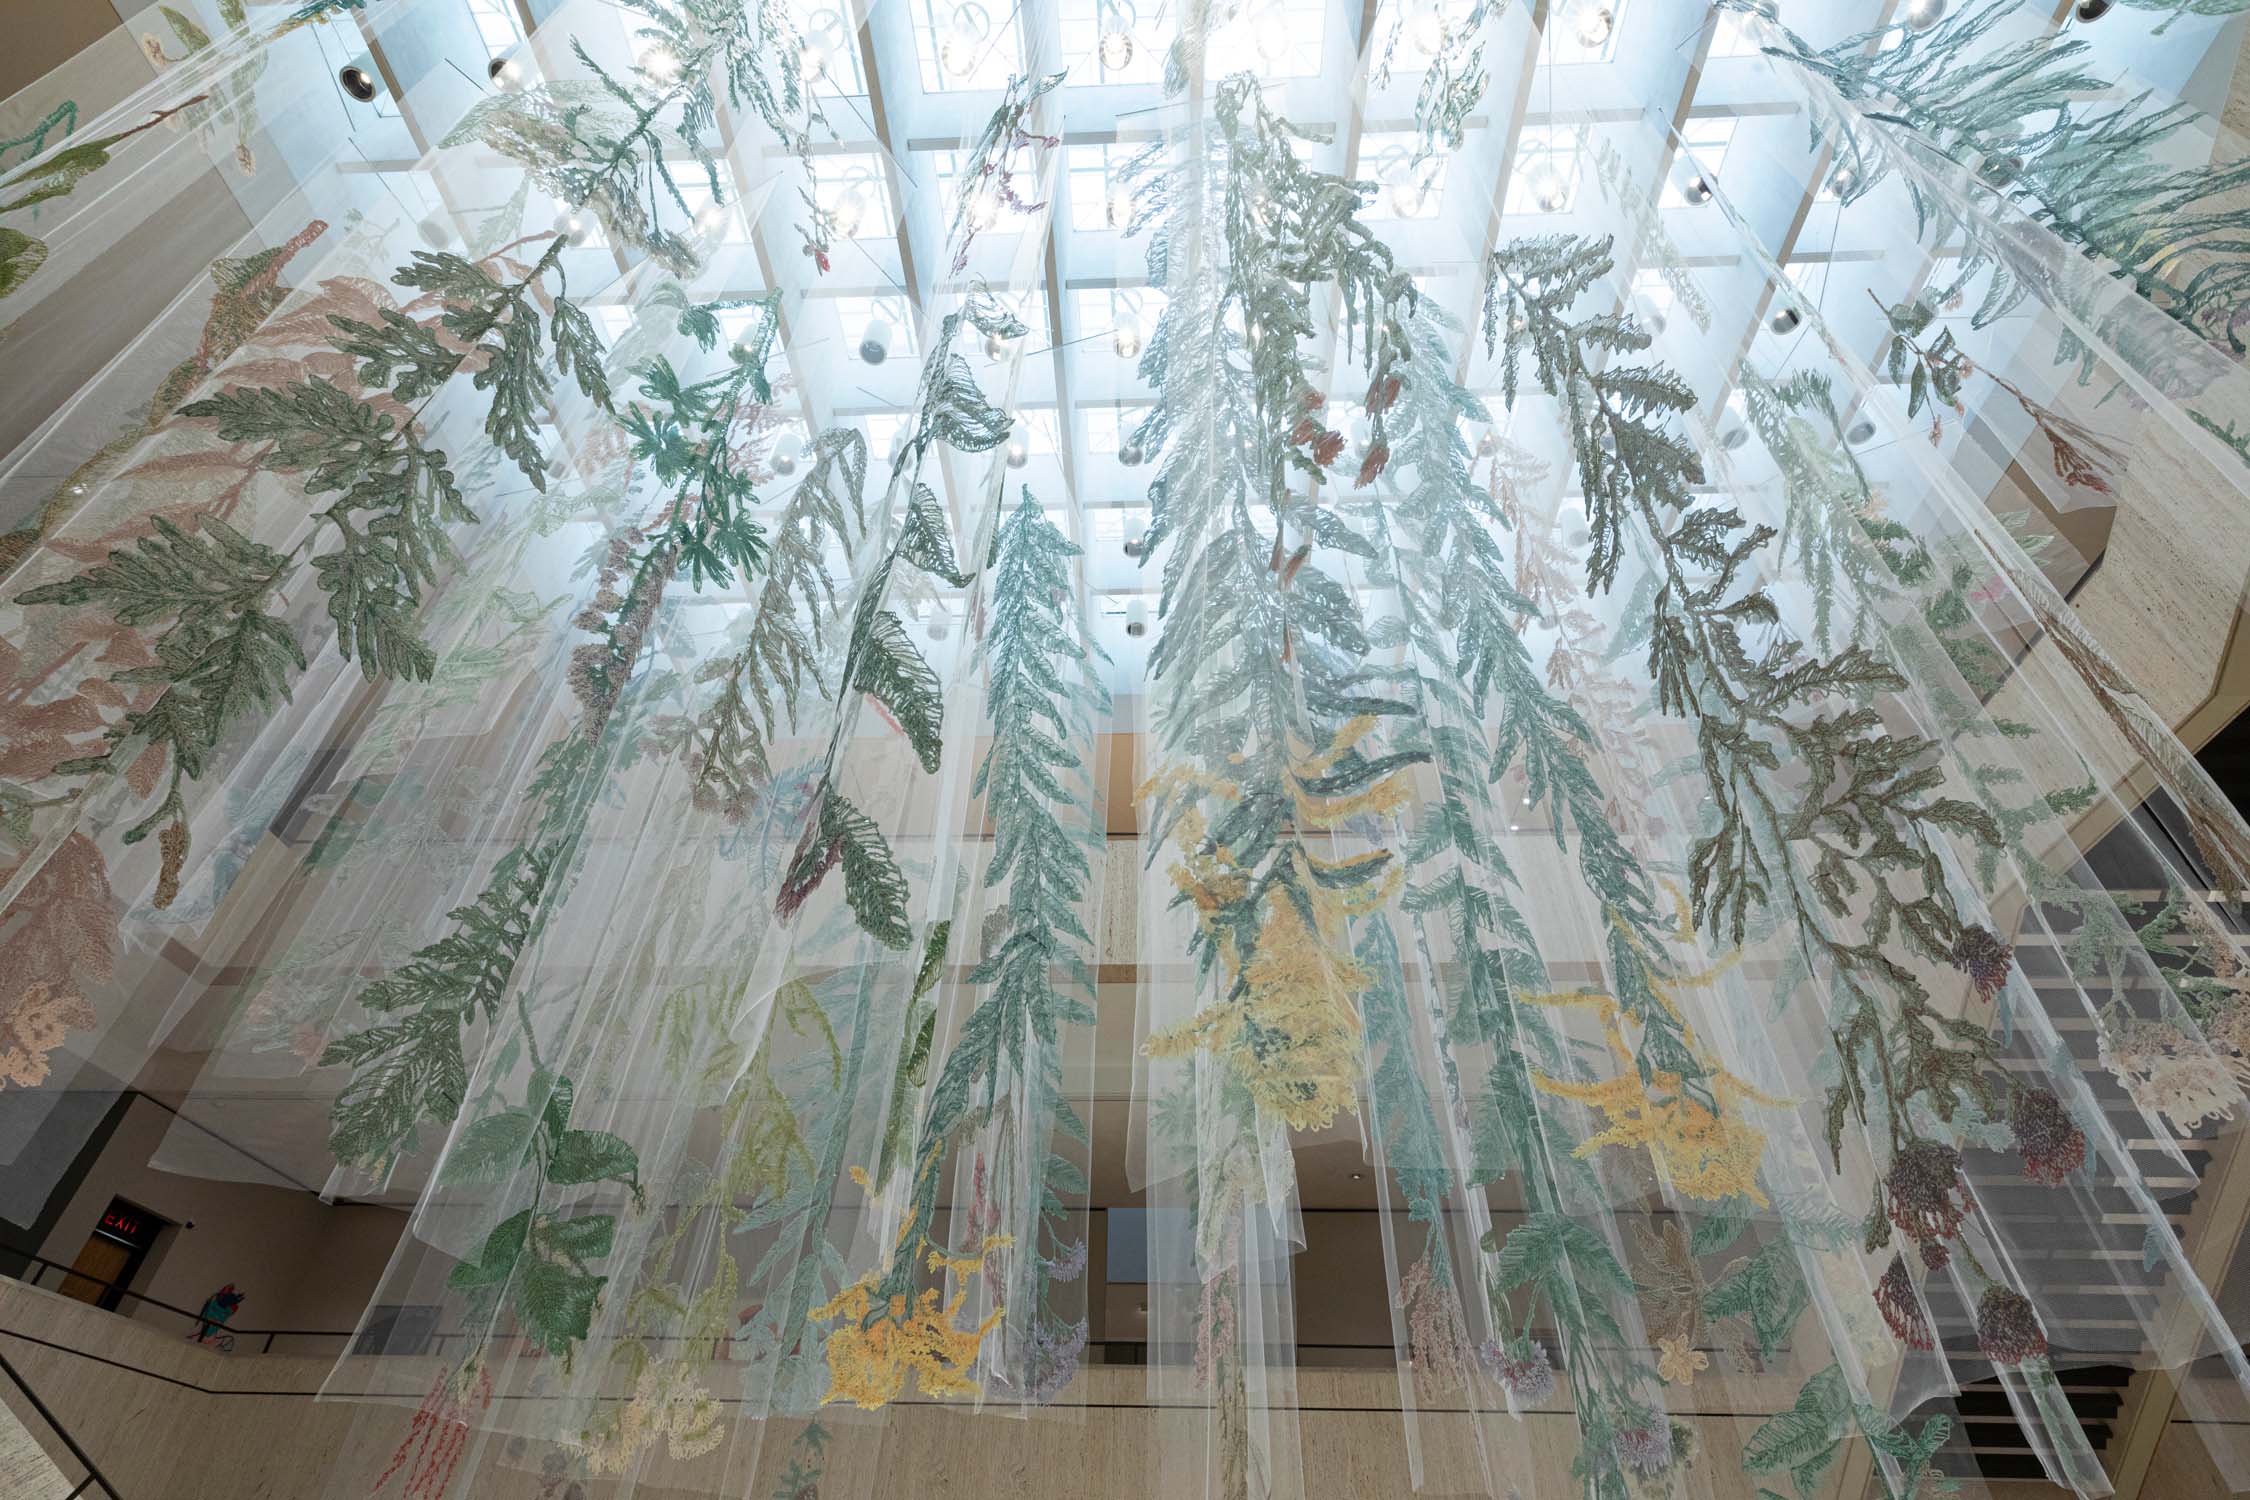 Oversize illustrations of plants mounted on translucent fabric hand from the brightly lit ceiling of a gallery